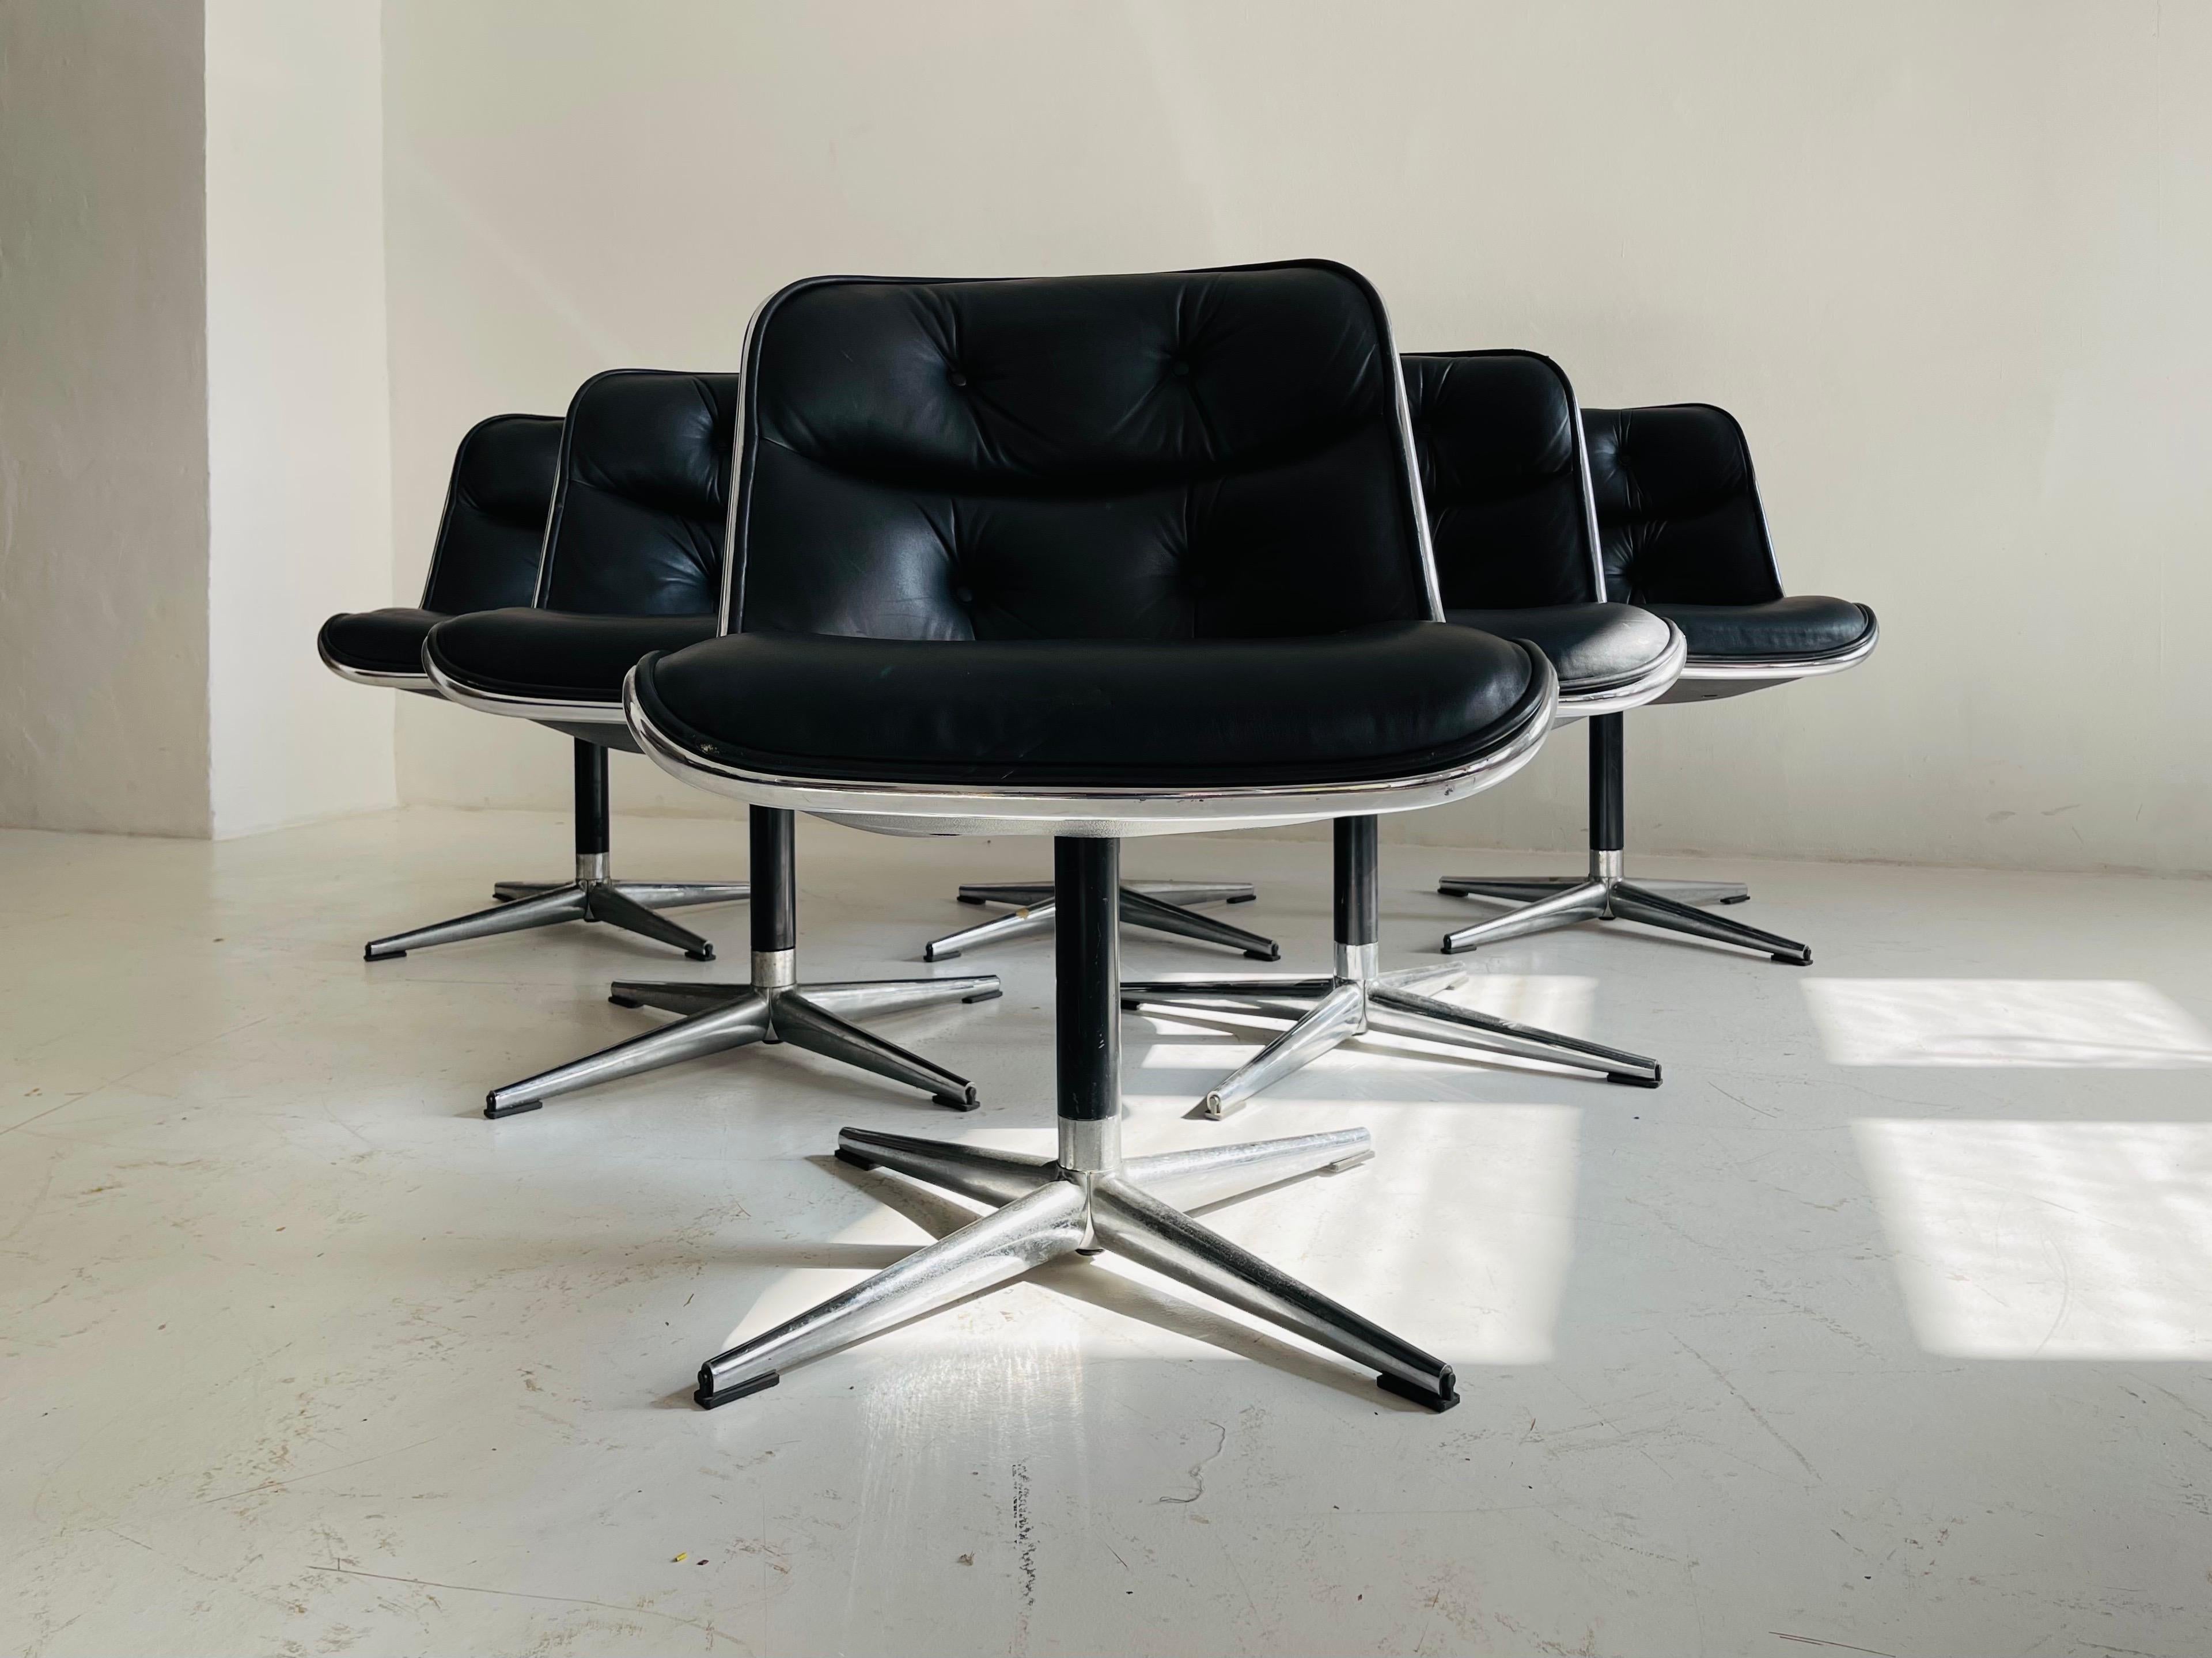 Metal Pollack Executive Chair by Charles Pollack for Knoll Set of Six Leather, 1960s For Sale